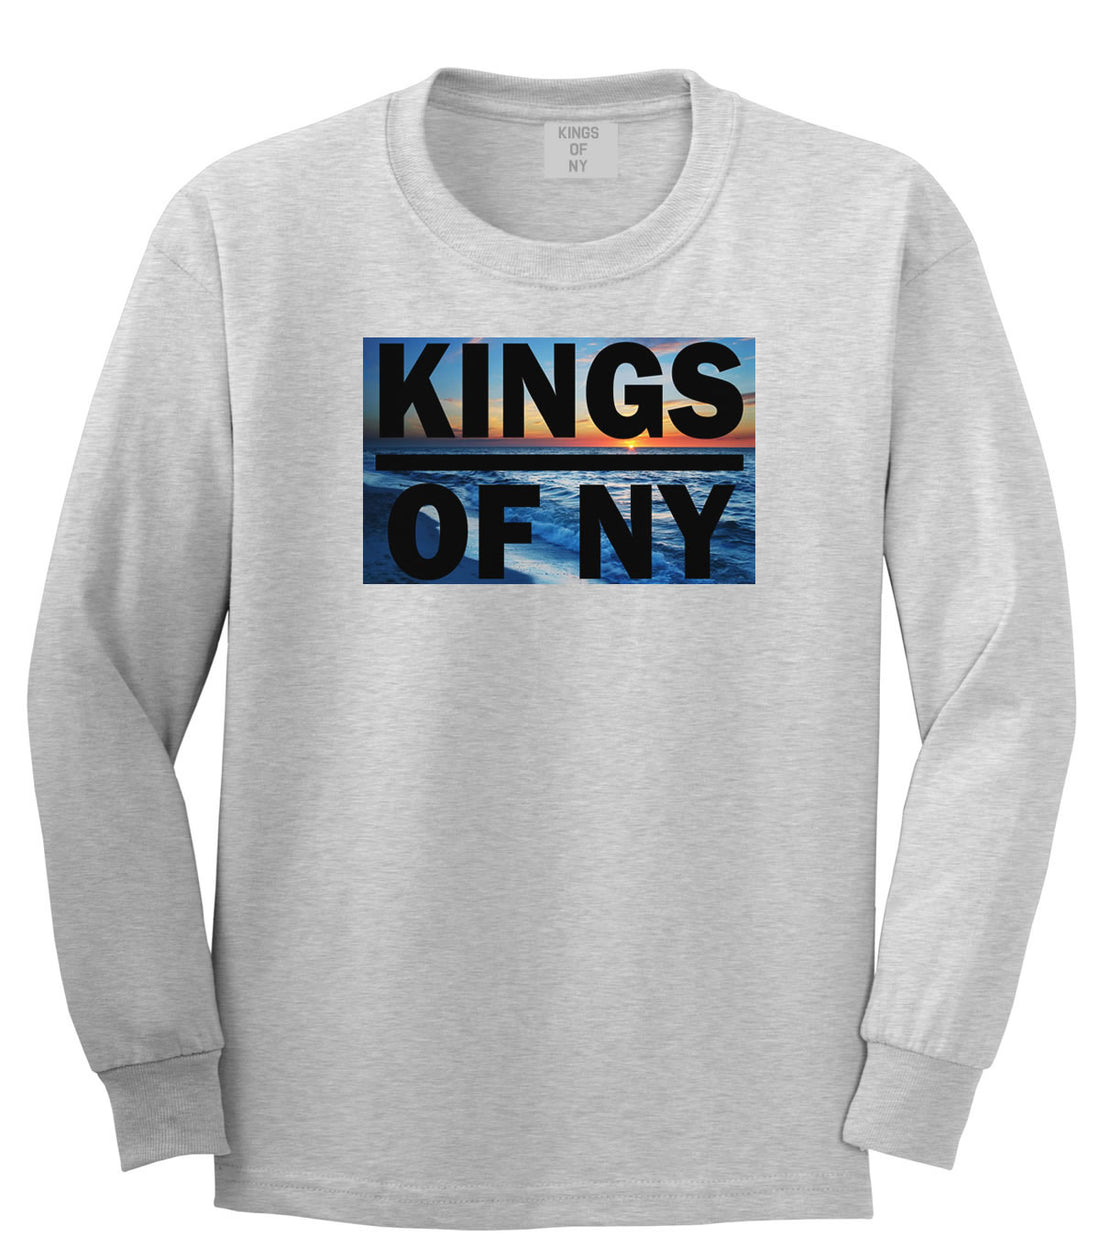 Sunset Logo Boys Kids Long Sleeve T-Shirt in Grey by Kings Of NY